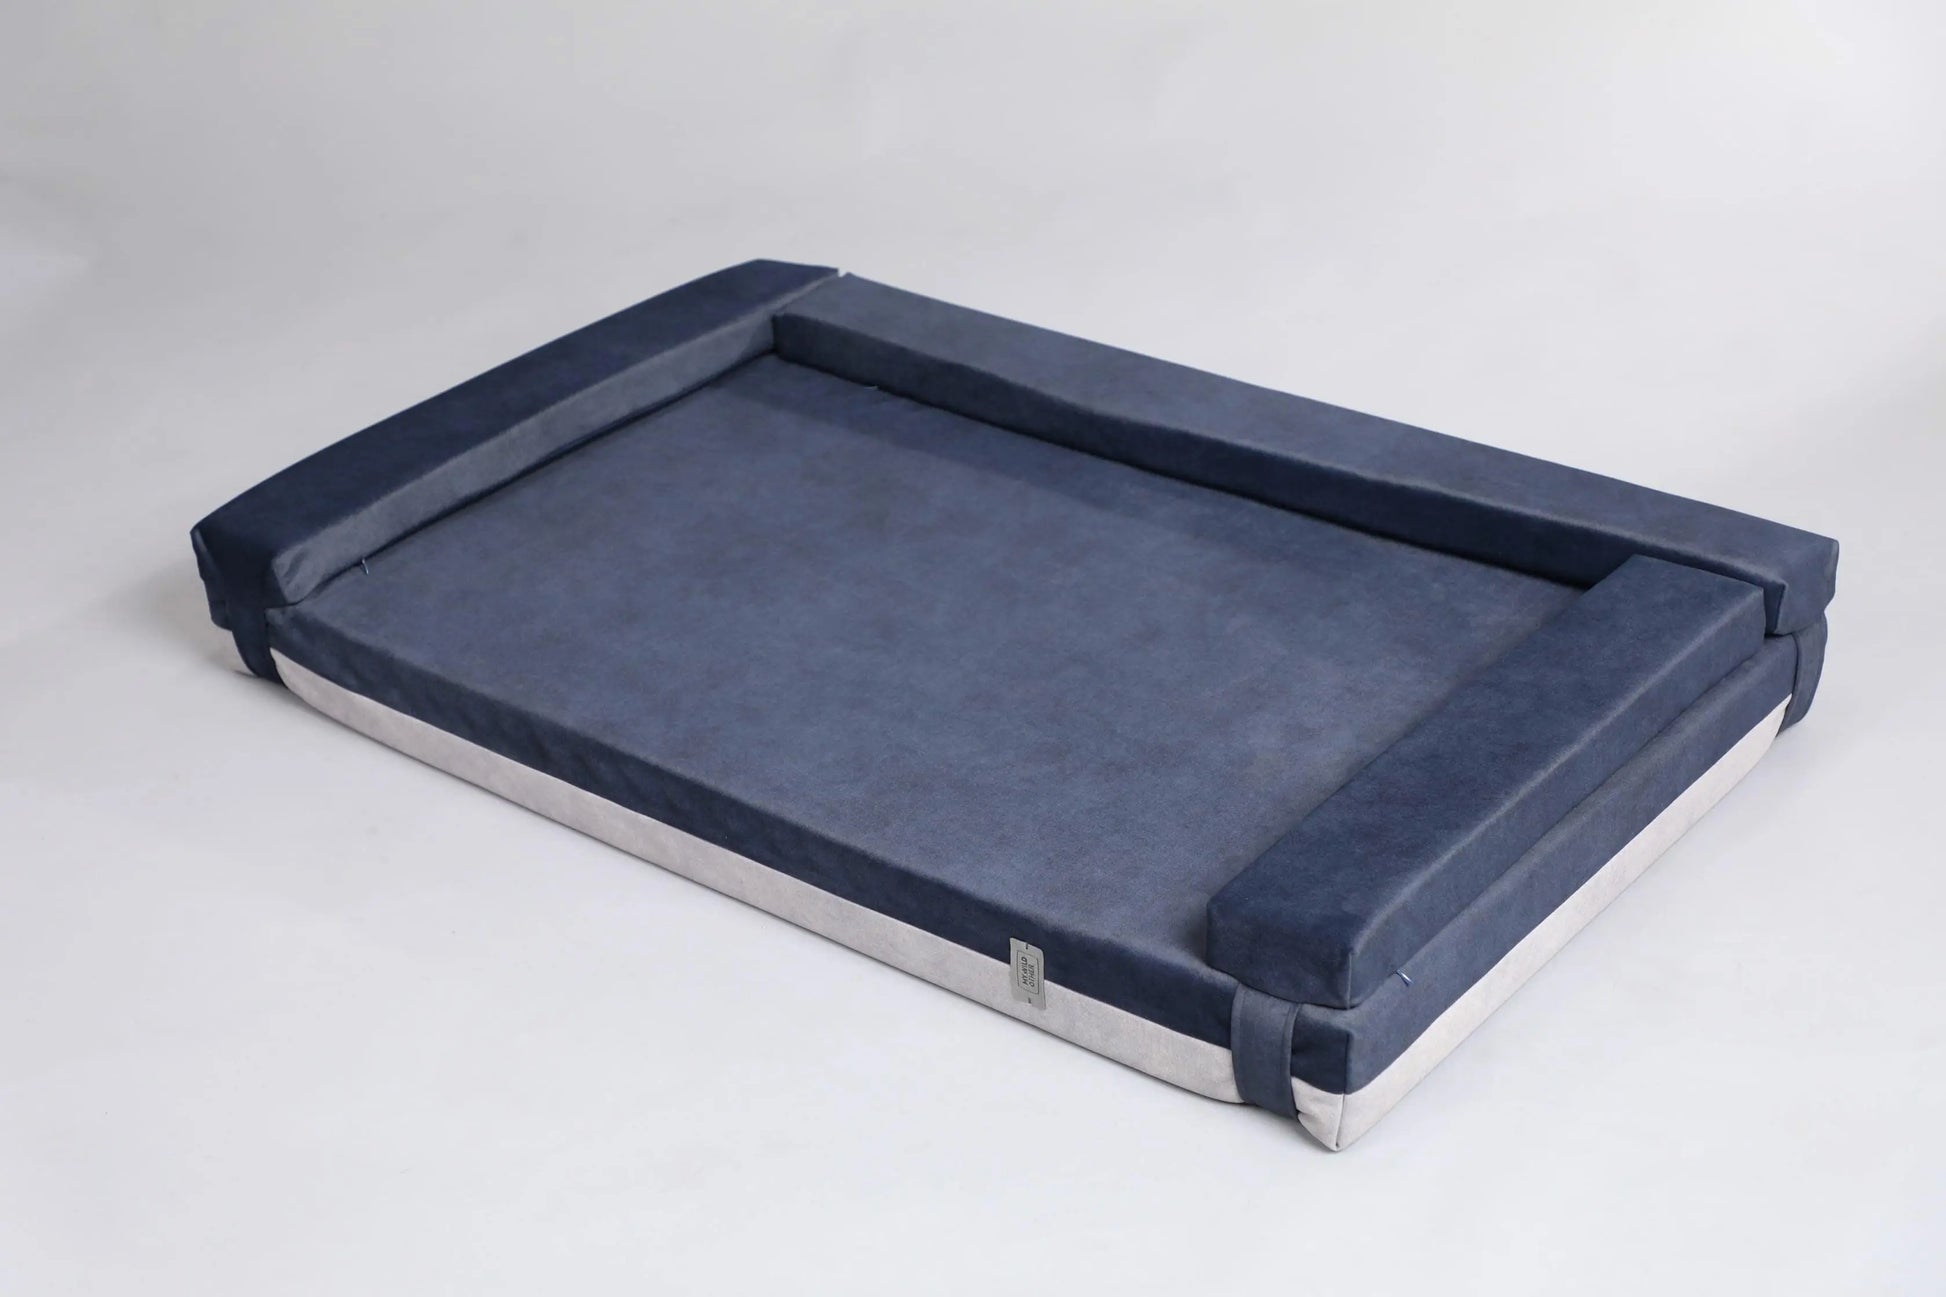 Transformer dog bed | Extra comfort & support | 2-sided | NAVY BLUE+CLOUD GREY - premium dog goods handmade in Europe by animalistus